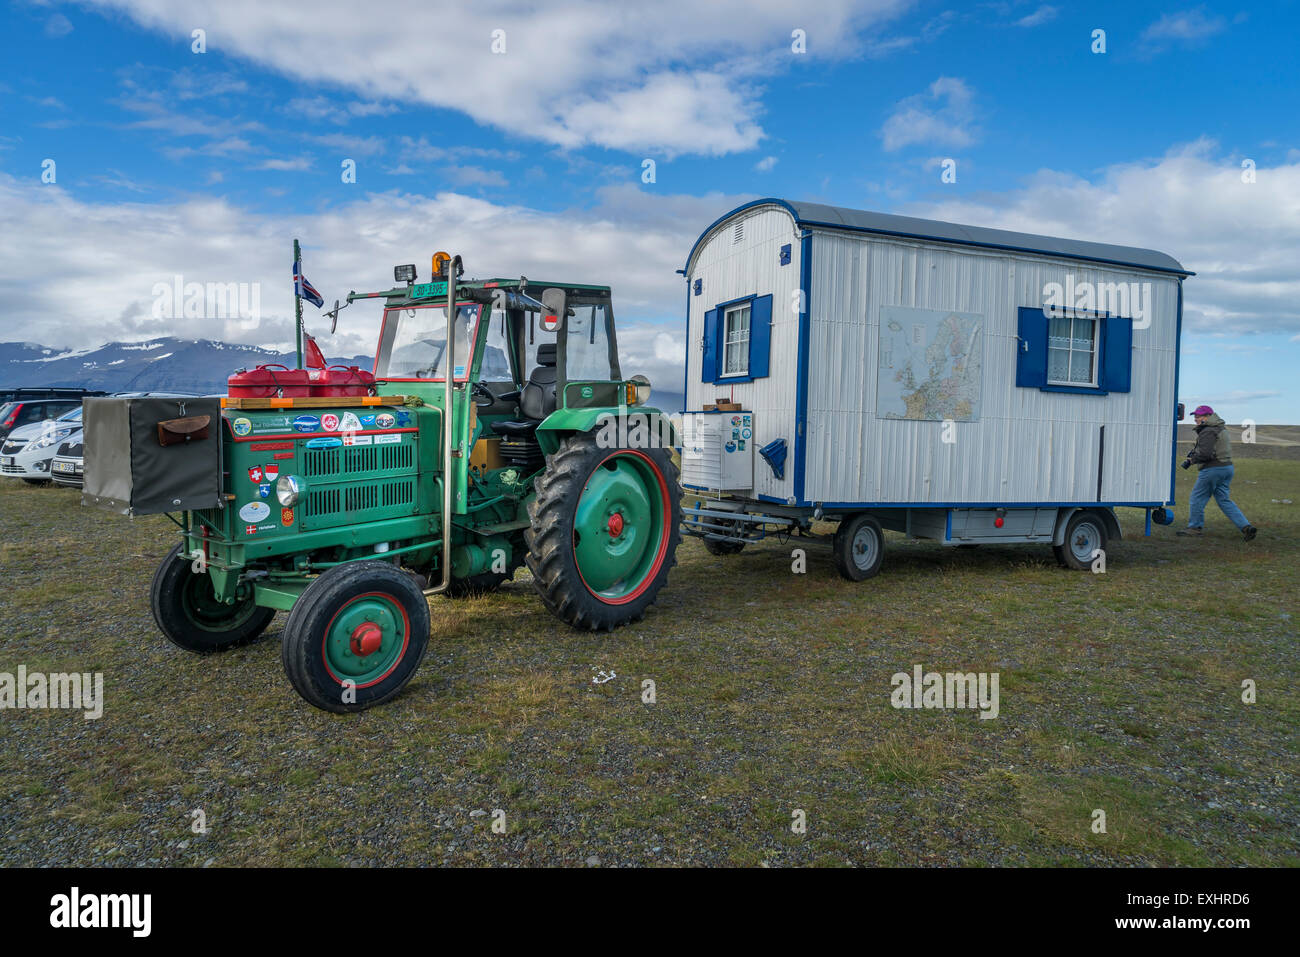 Homemade caravan being pulled by a farm tractor, in the parking lot of the Jokulsarlon Glacial Lagoon, Iceland Stock Photo